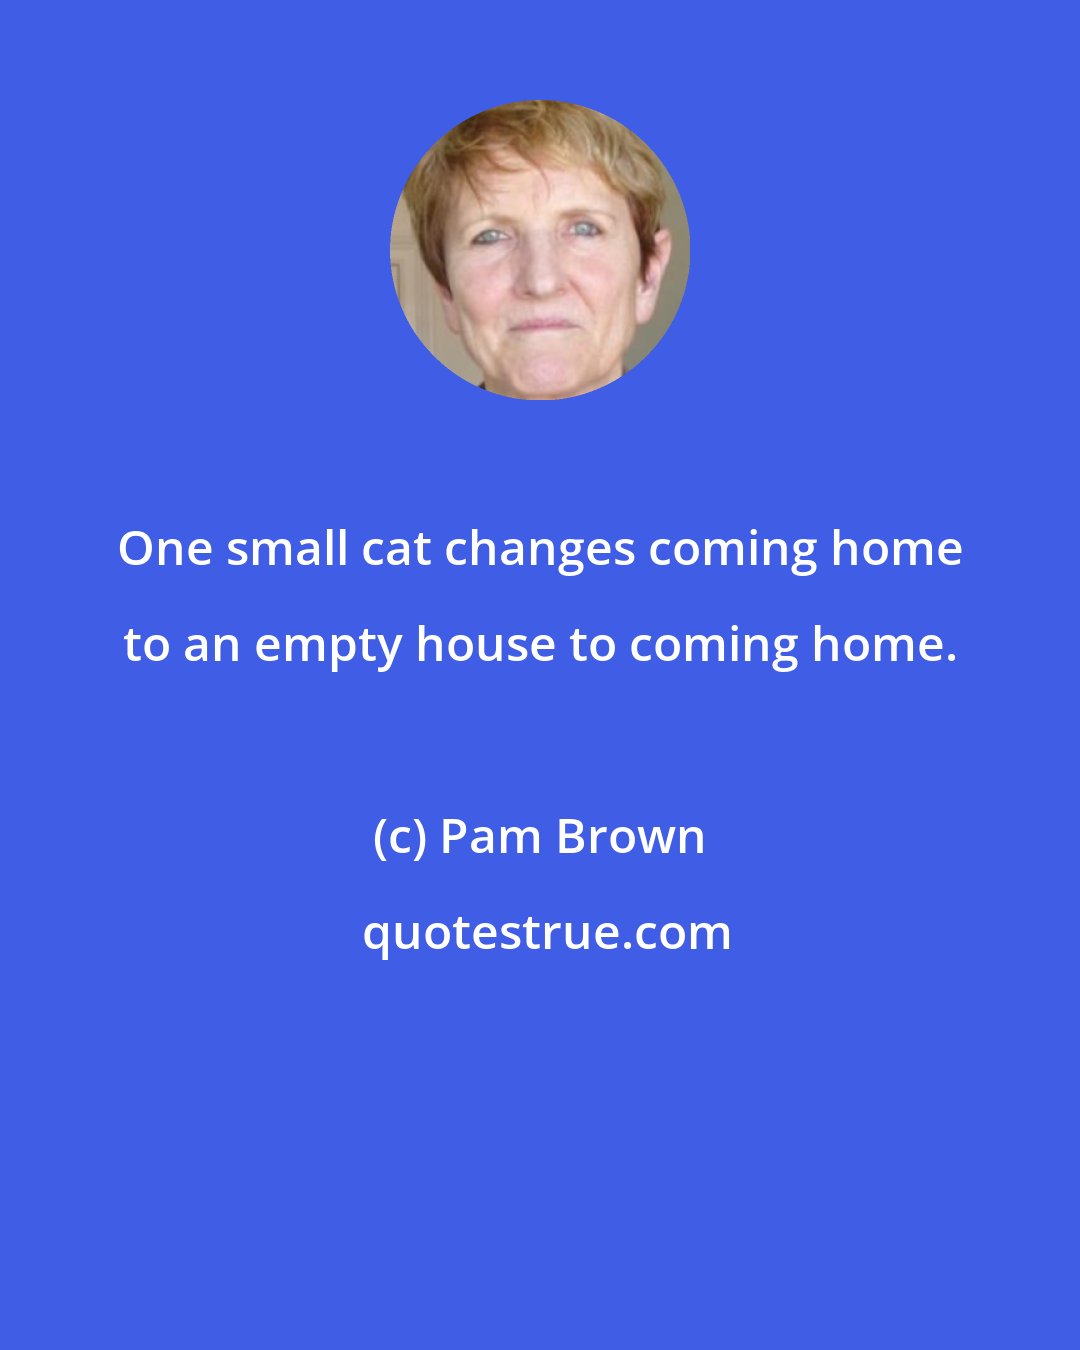 Pam Brown: One small cat changes coming home to an empty house to coming home.